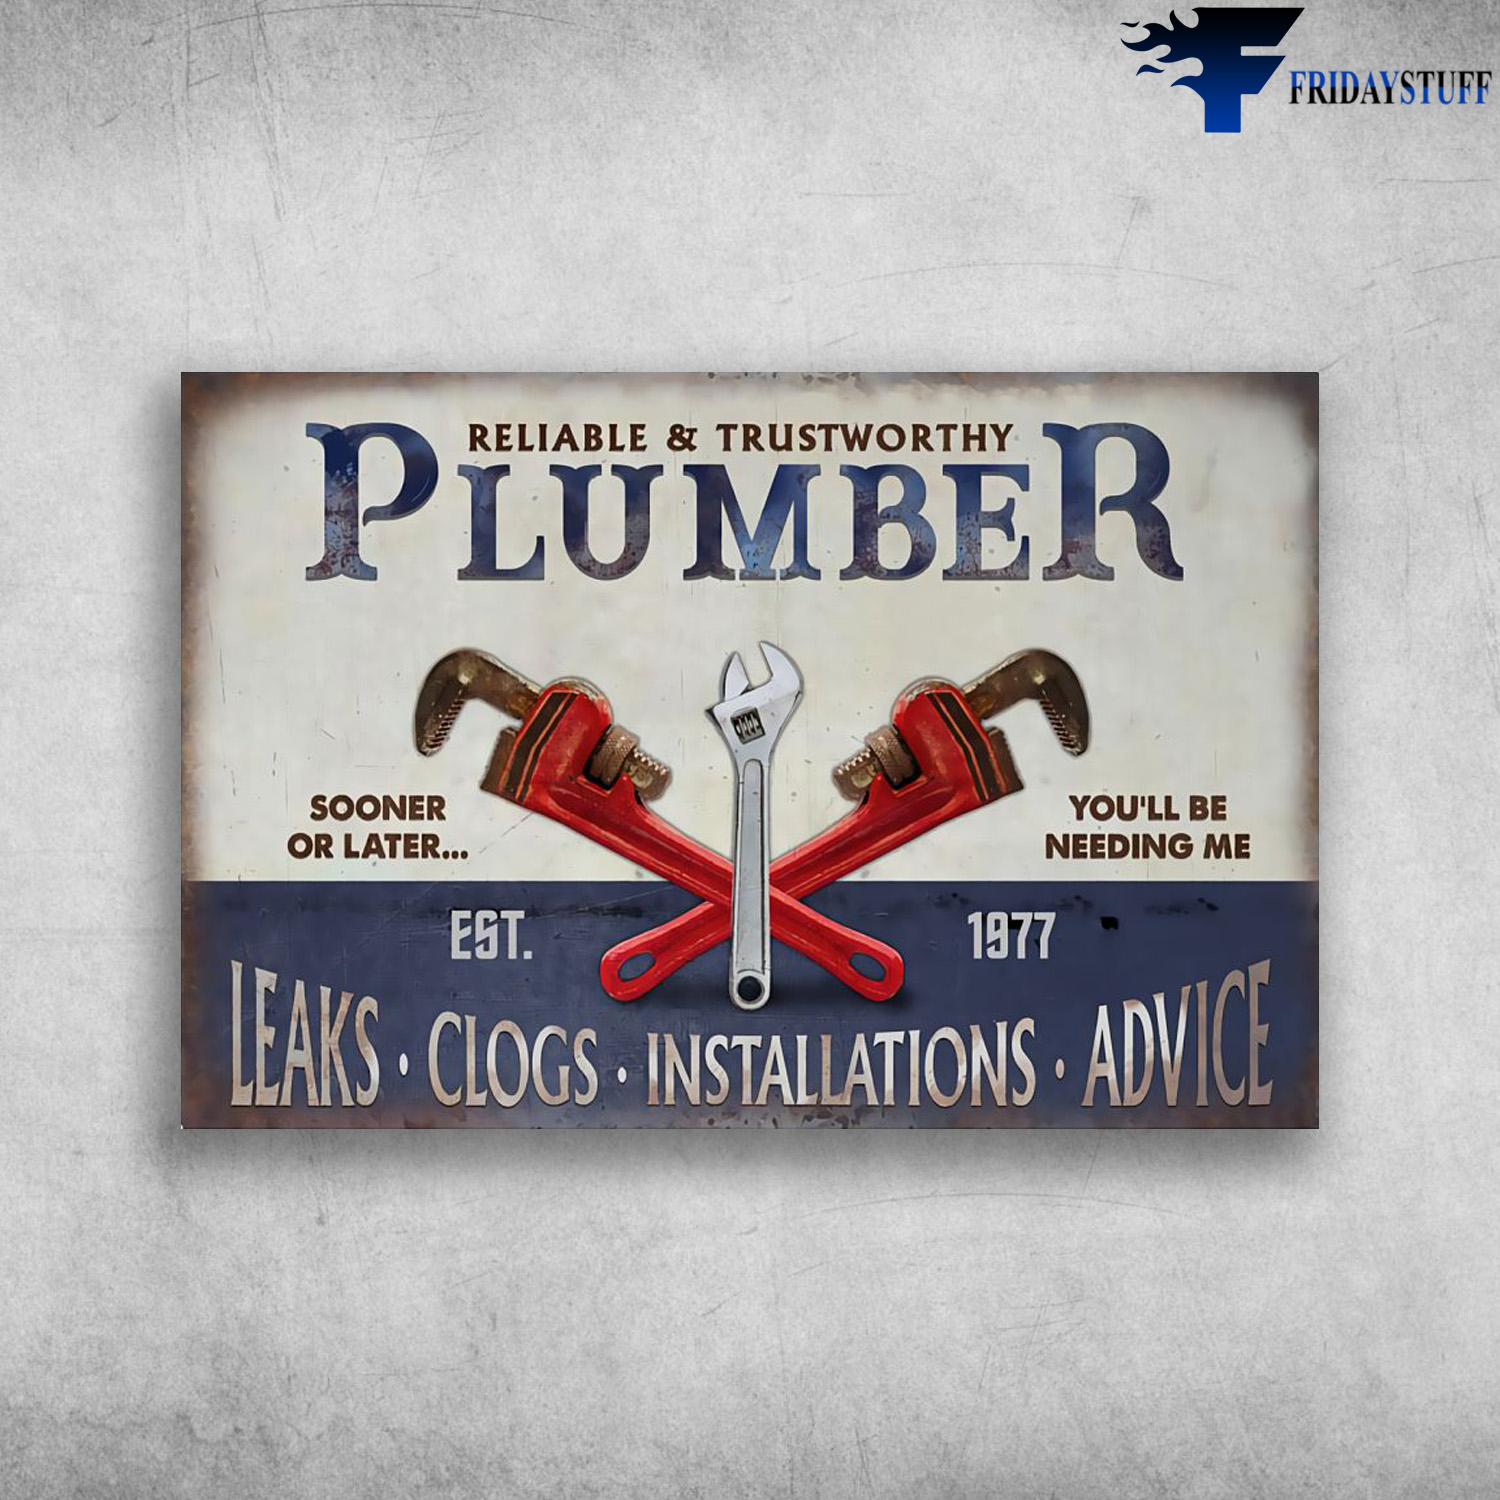 Plumber - Reliable And Trustworthy, Sooner Or Later, You'll Be Needing Me, Est 1977, Leaks Clogs Installations Advice